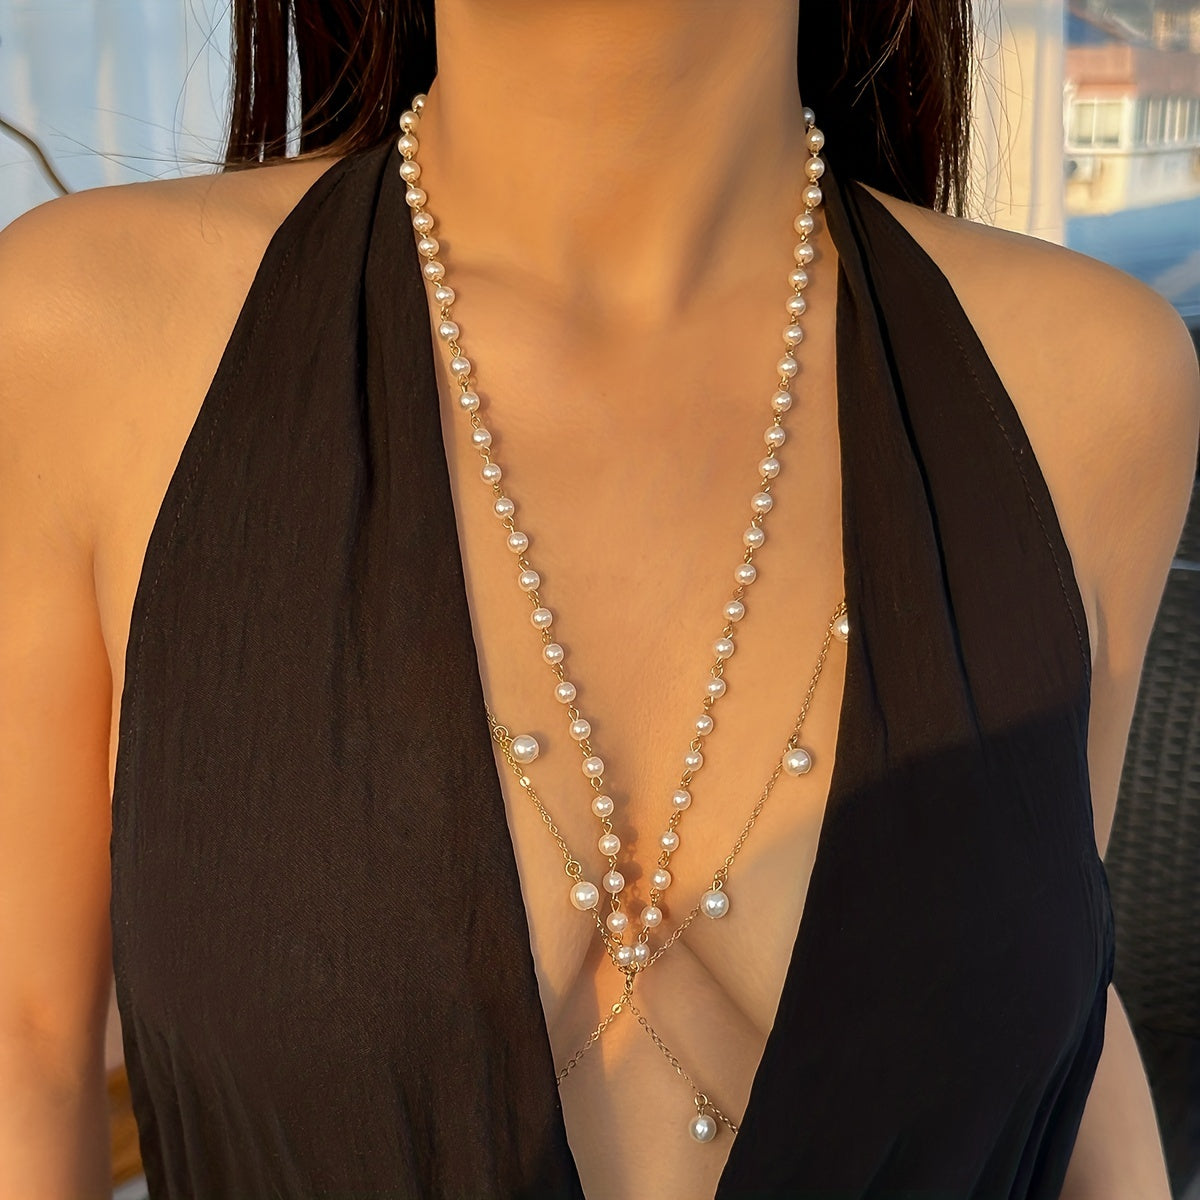 Elevate Your Look with This Elegant Copper Body Chain & Faux Pearls Body Jewelry